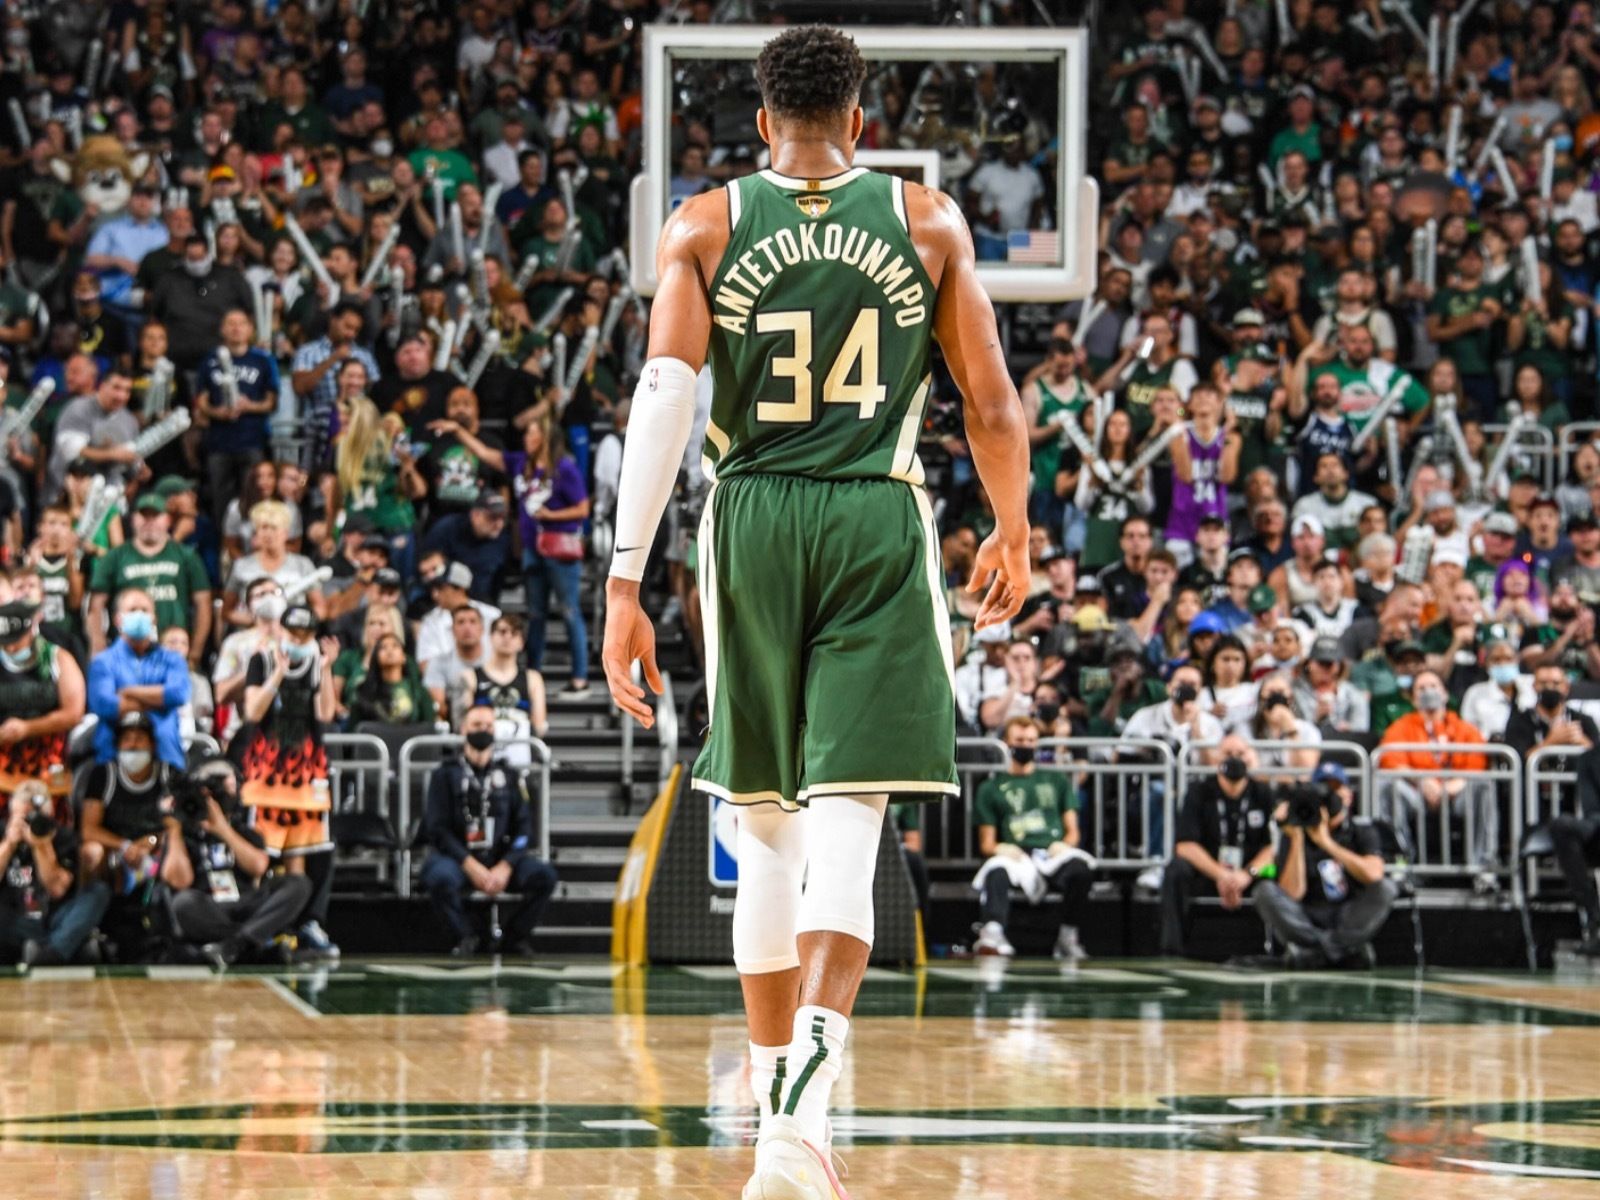 awesome image from the Bucks' first NBA Finals win in almost 50 years